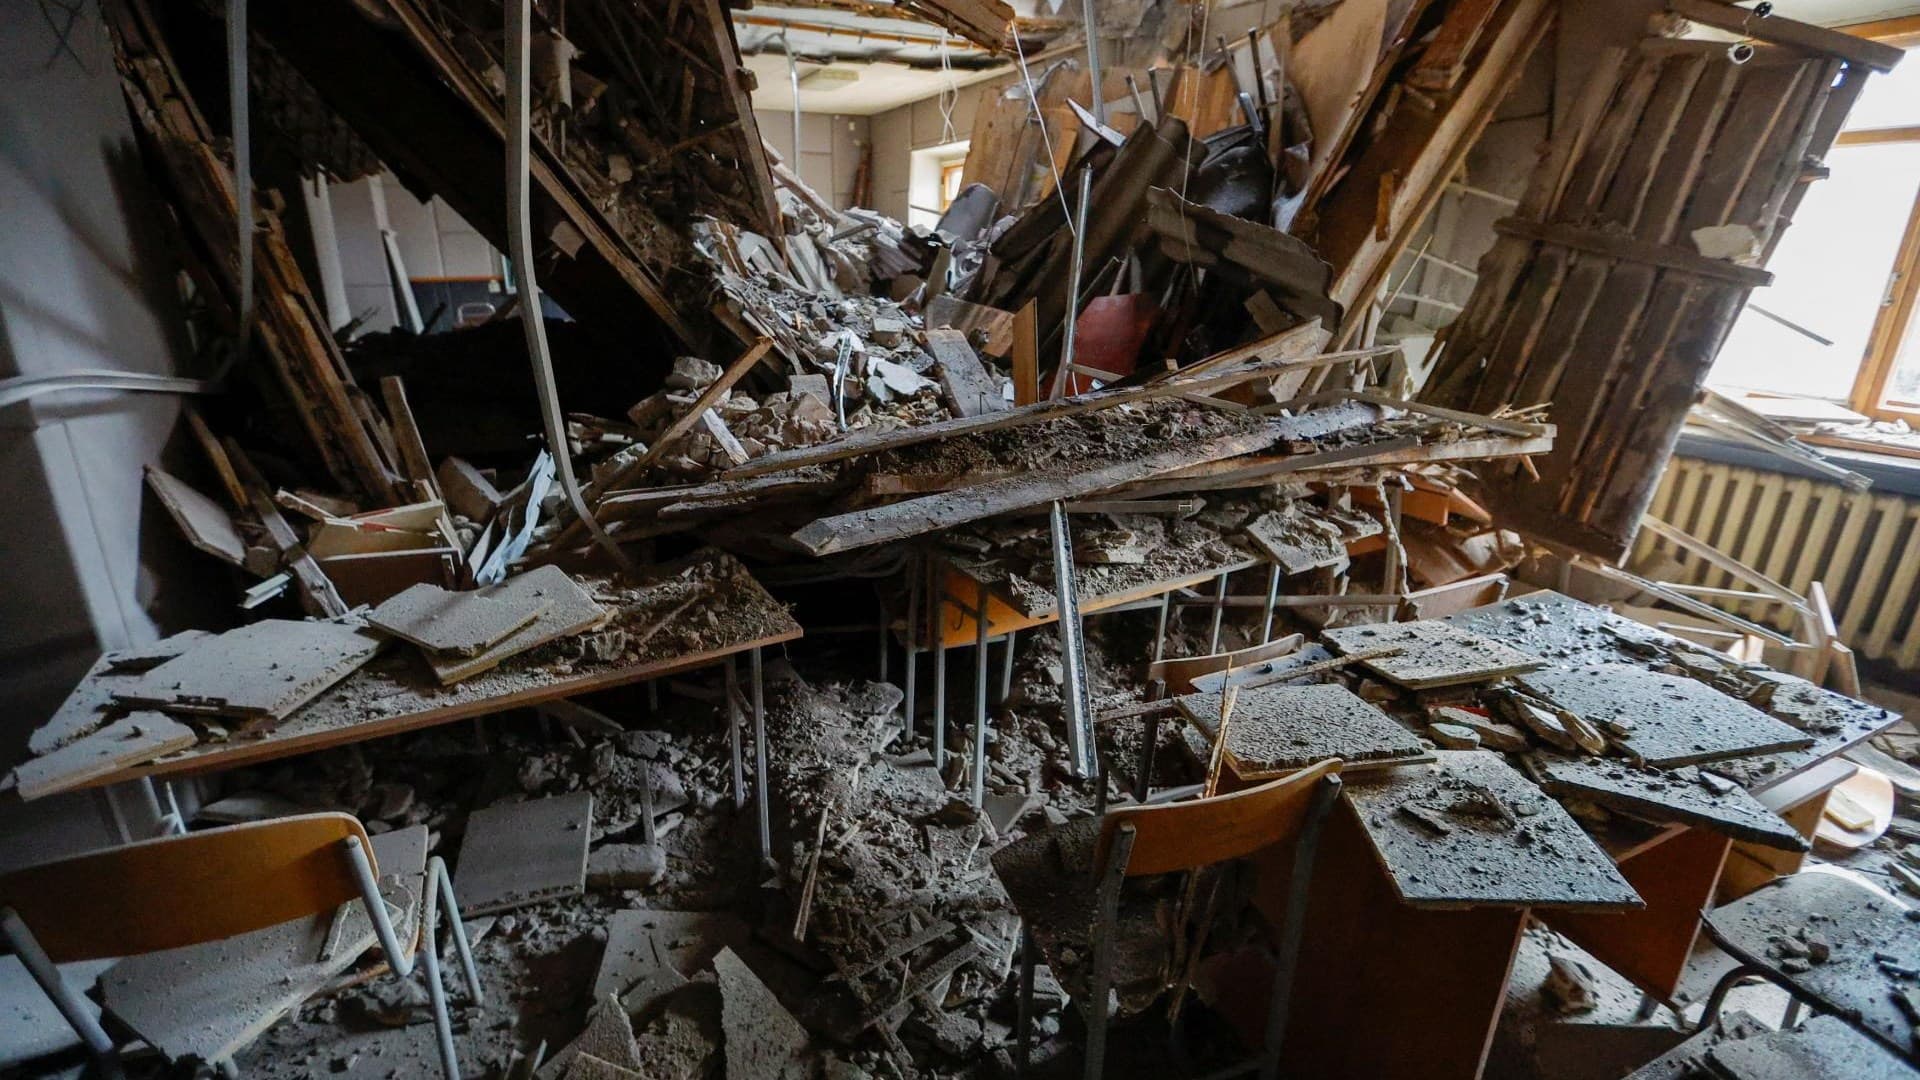 Inside a building of a local university of economics and trade that was heavily damaged in recent shelling in Donetsk